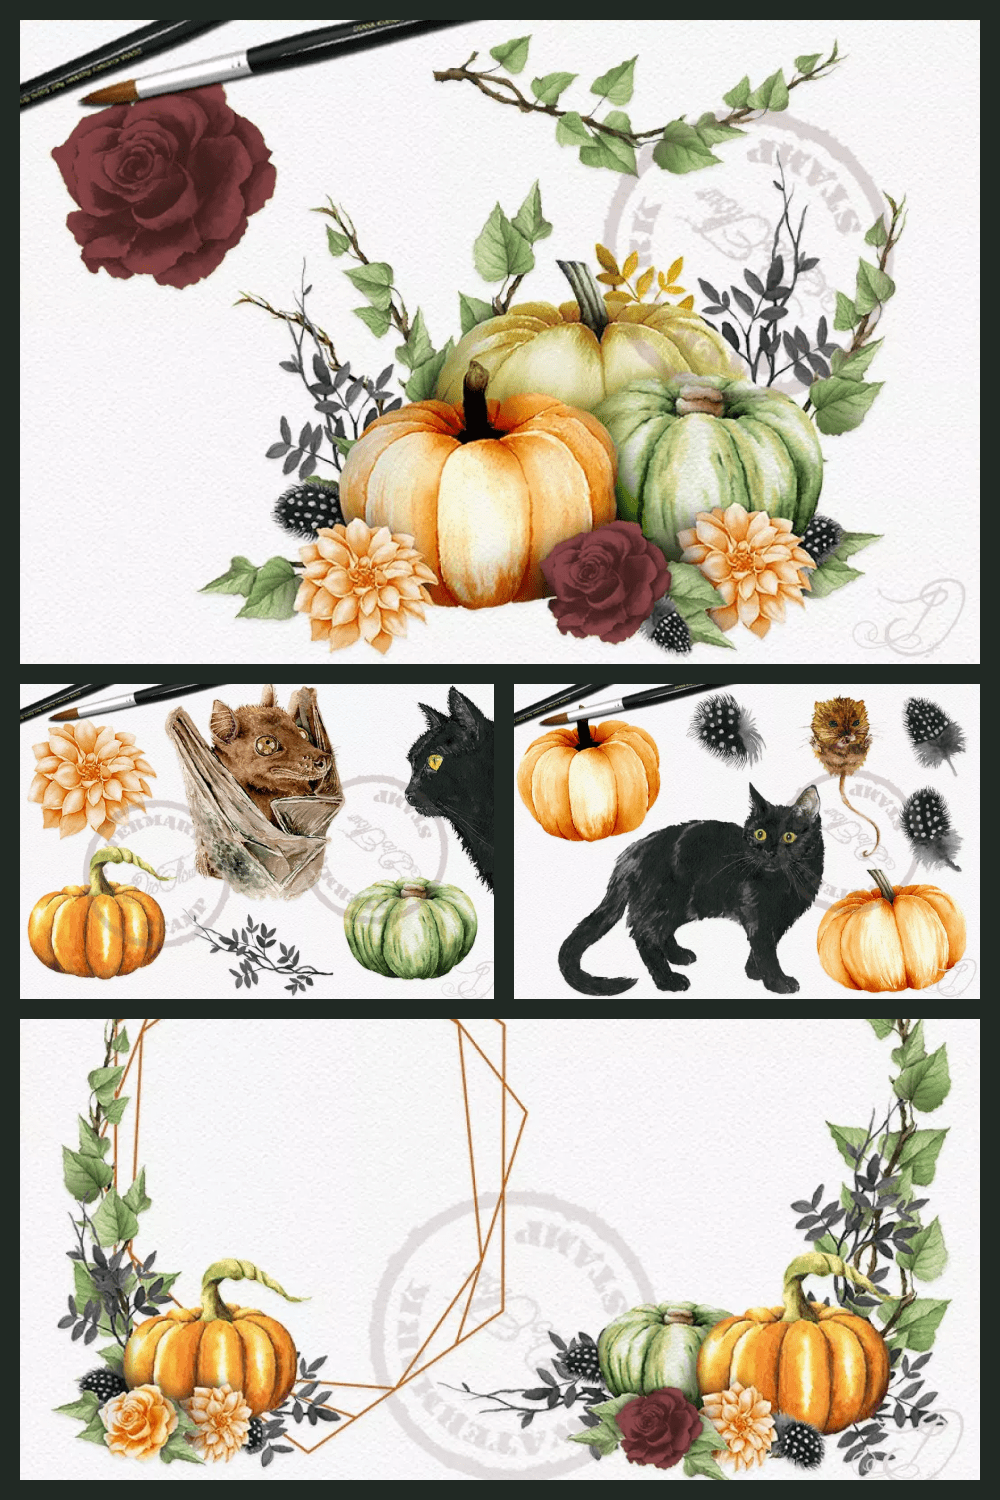 A collage of images of a black cat next to yellow and green pumpkins.